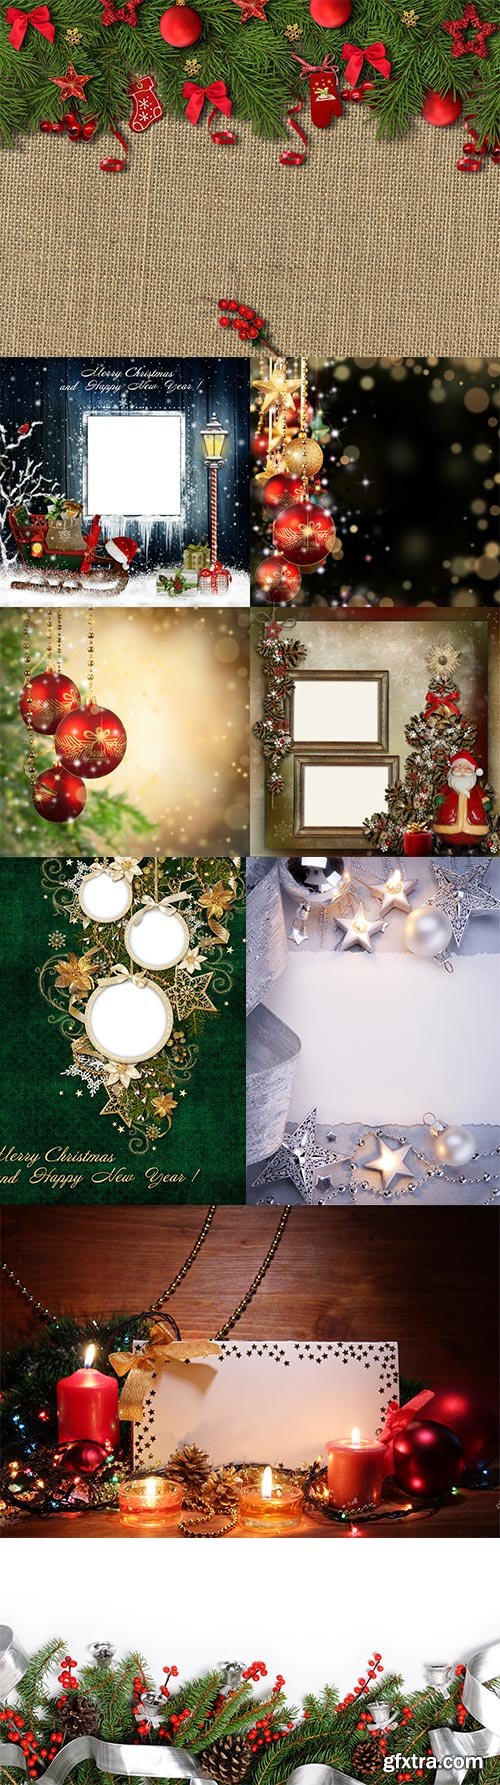 Christmas winter backgrounds - 6